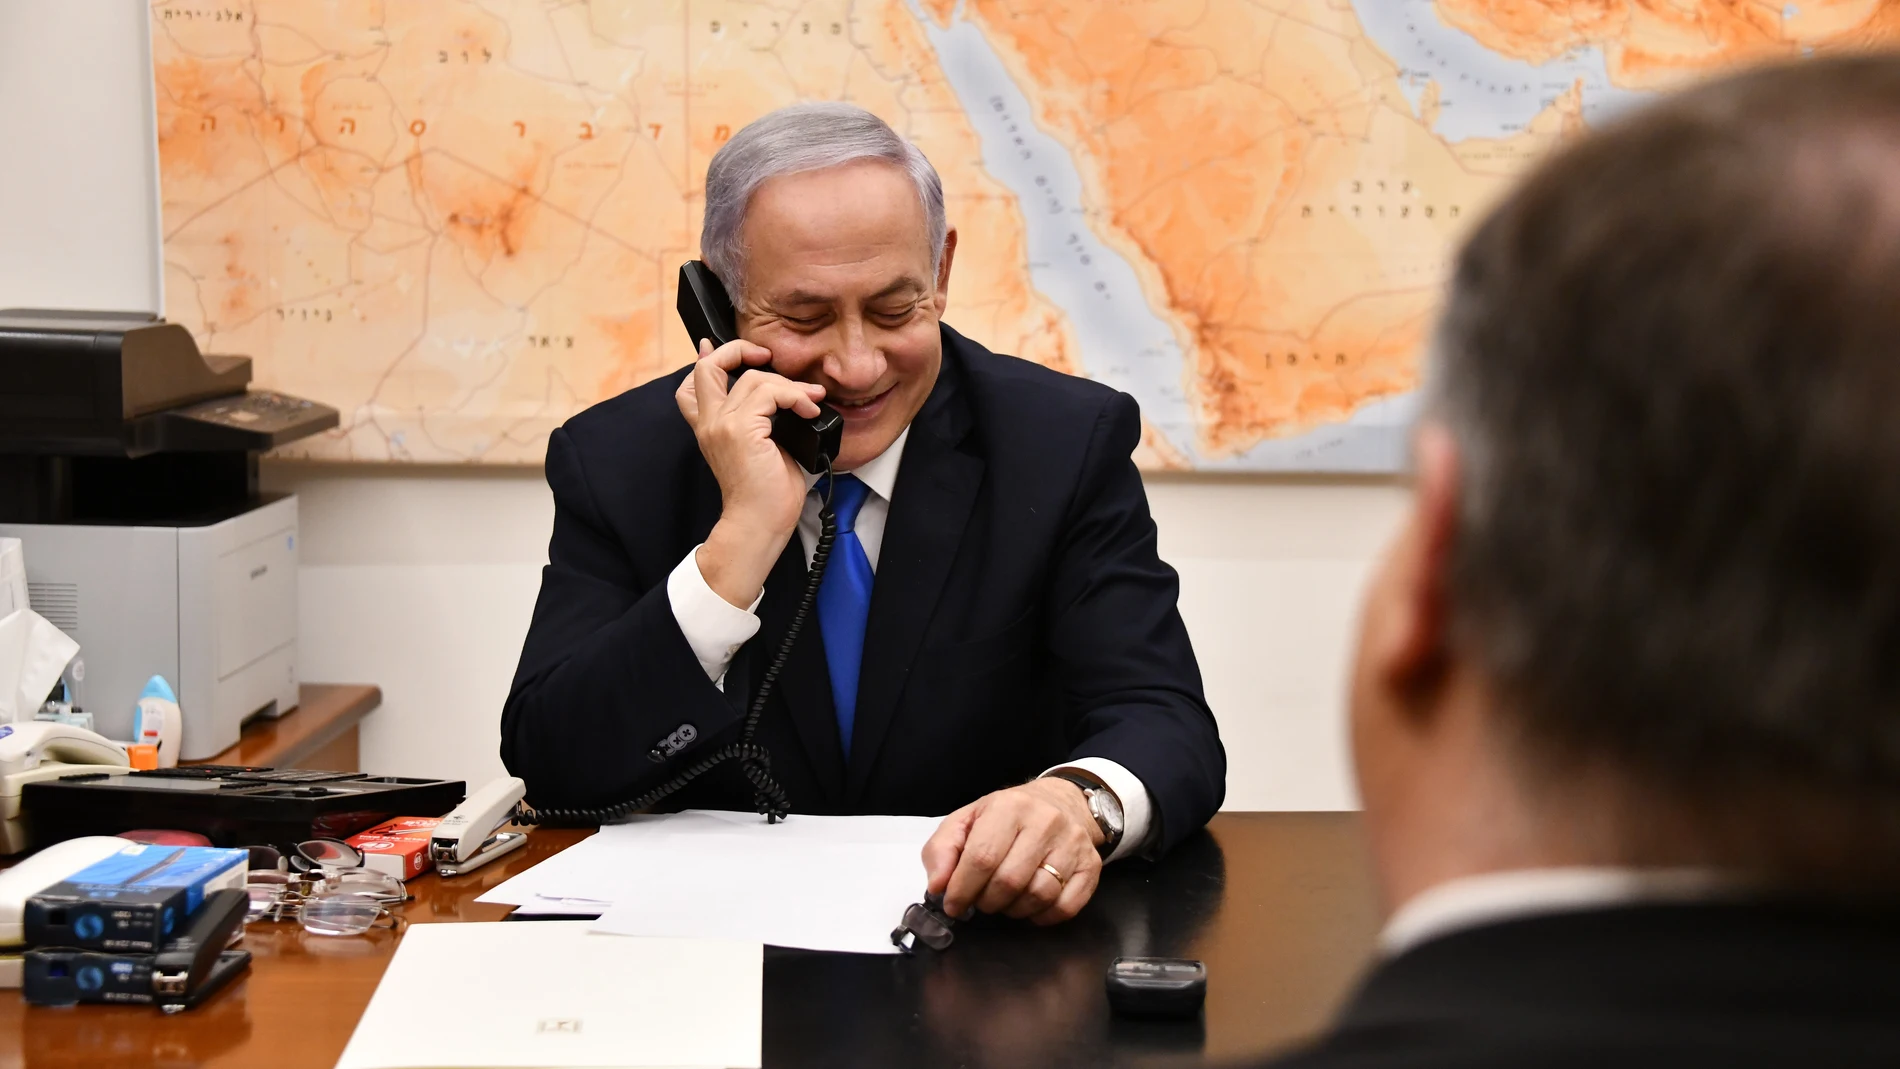 March 21, 2019 - Jerusalem, Israel - Israeli Prime Minister Benjamin Netanyahu smiles as he speaks by phone with U.S. President Donald Trump from his office March 21, 2019 in Jerusalem, Israel. Trump surprised Netanyahu telling him the U.S. will recognize Israeli sovereignty over the occupied Golan Heights, which it captured from Syria in 1967. (Foto de ARCHIVO) 21/03/2019